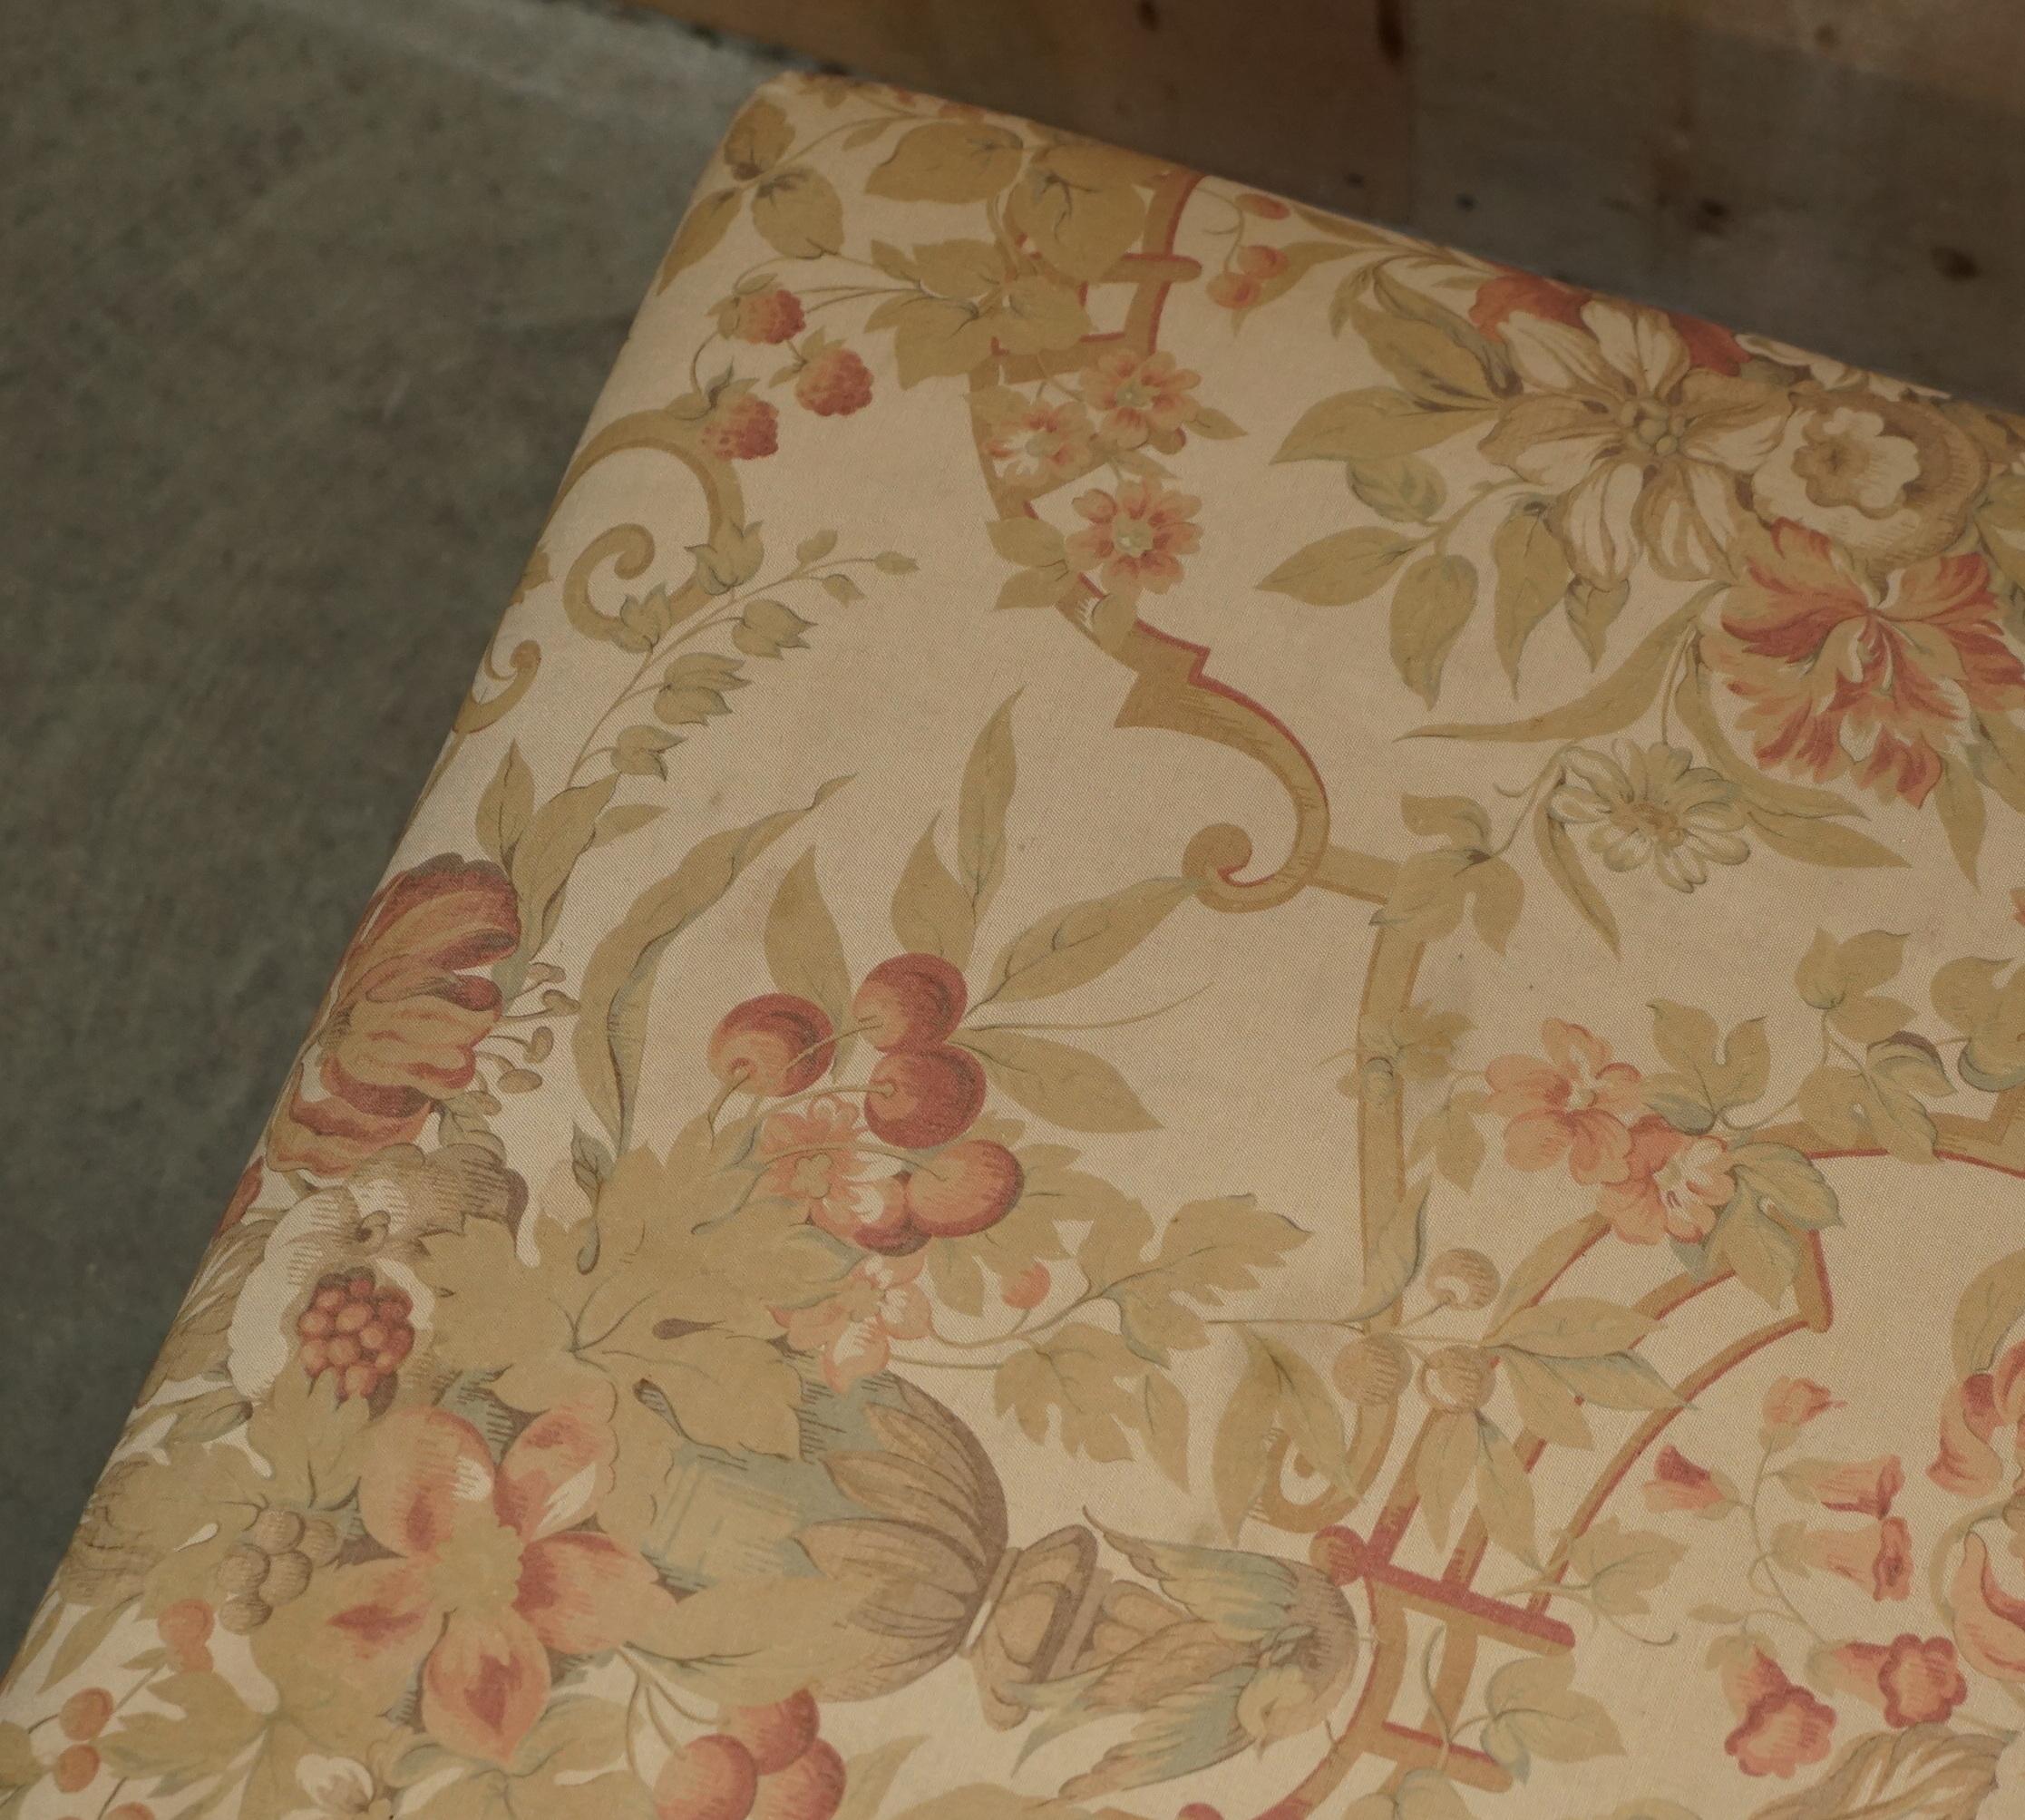 COLLECTABLE VERY LARGE ViNTAGE GEORGE SMITH CHELSEA FLORAL FOOTSTOOL OTTOMAN For Sale 2